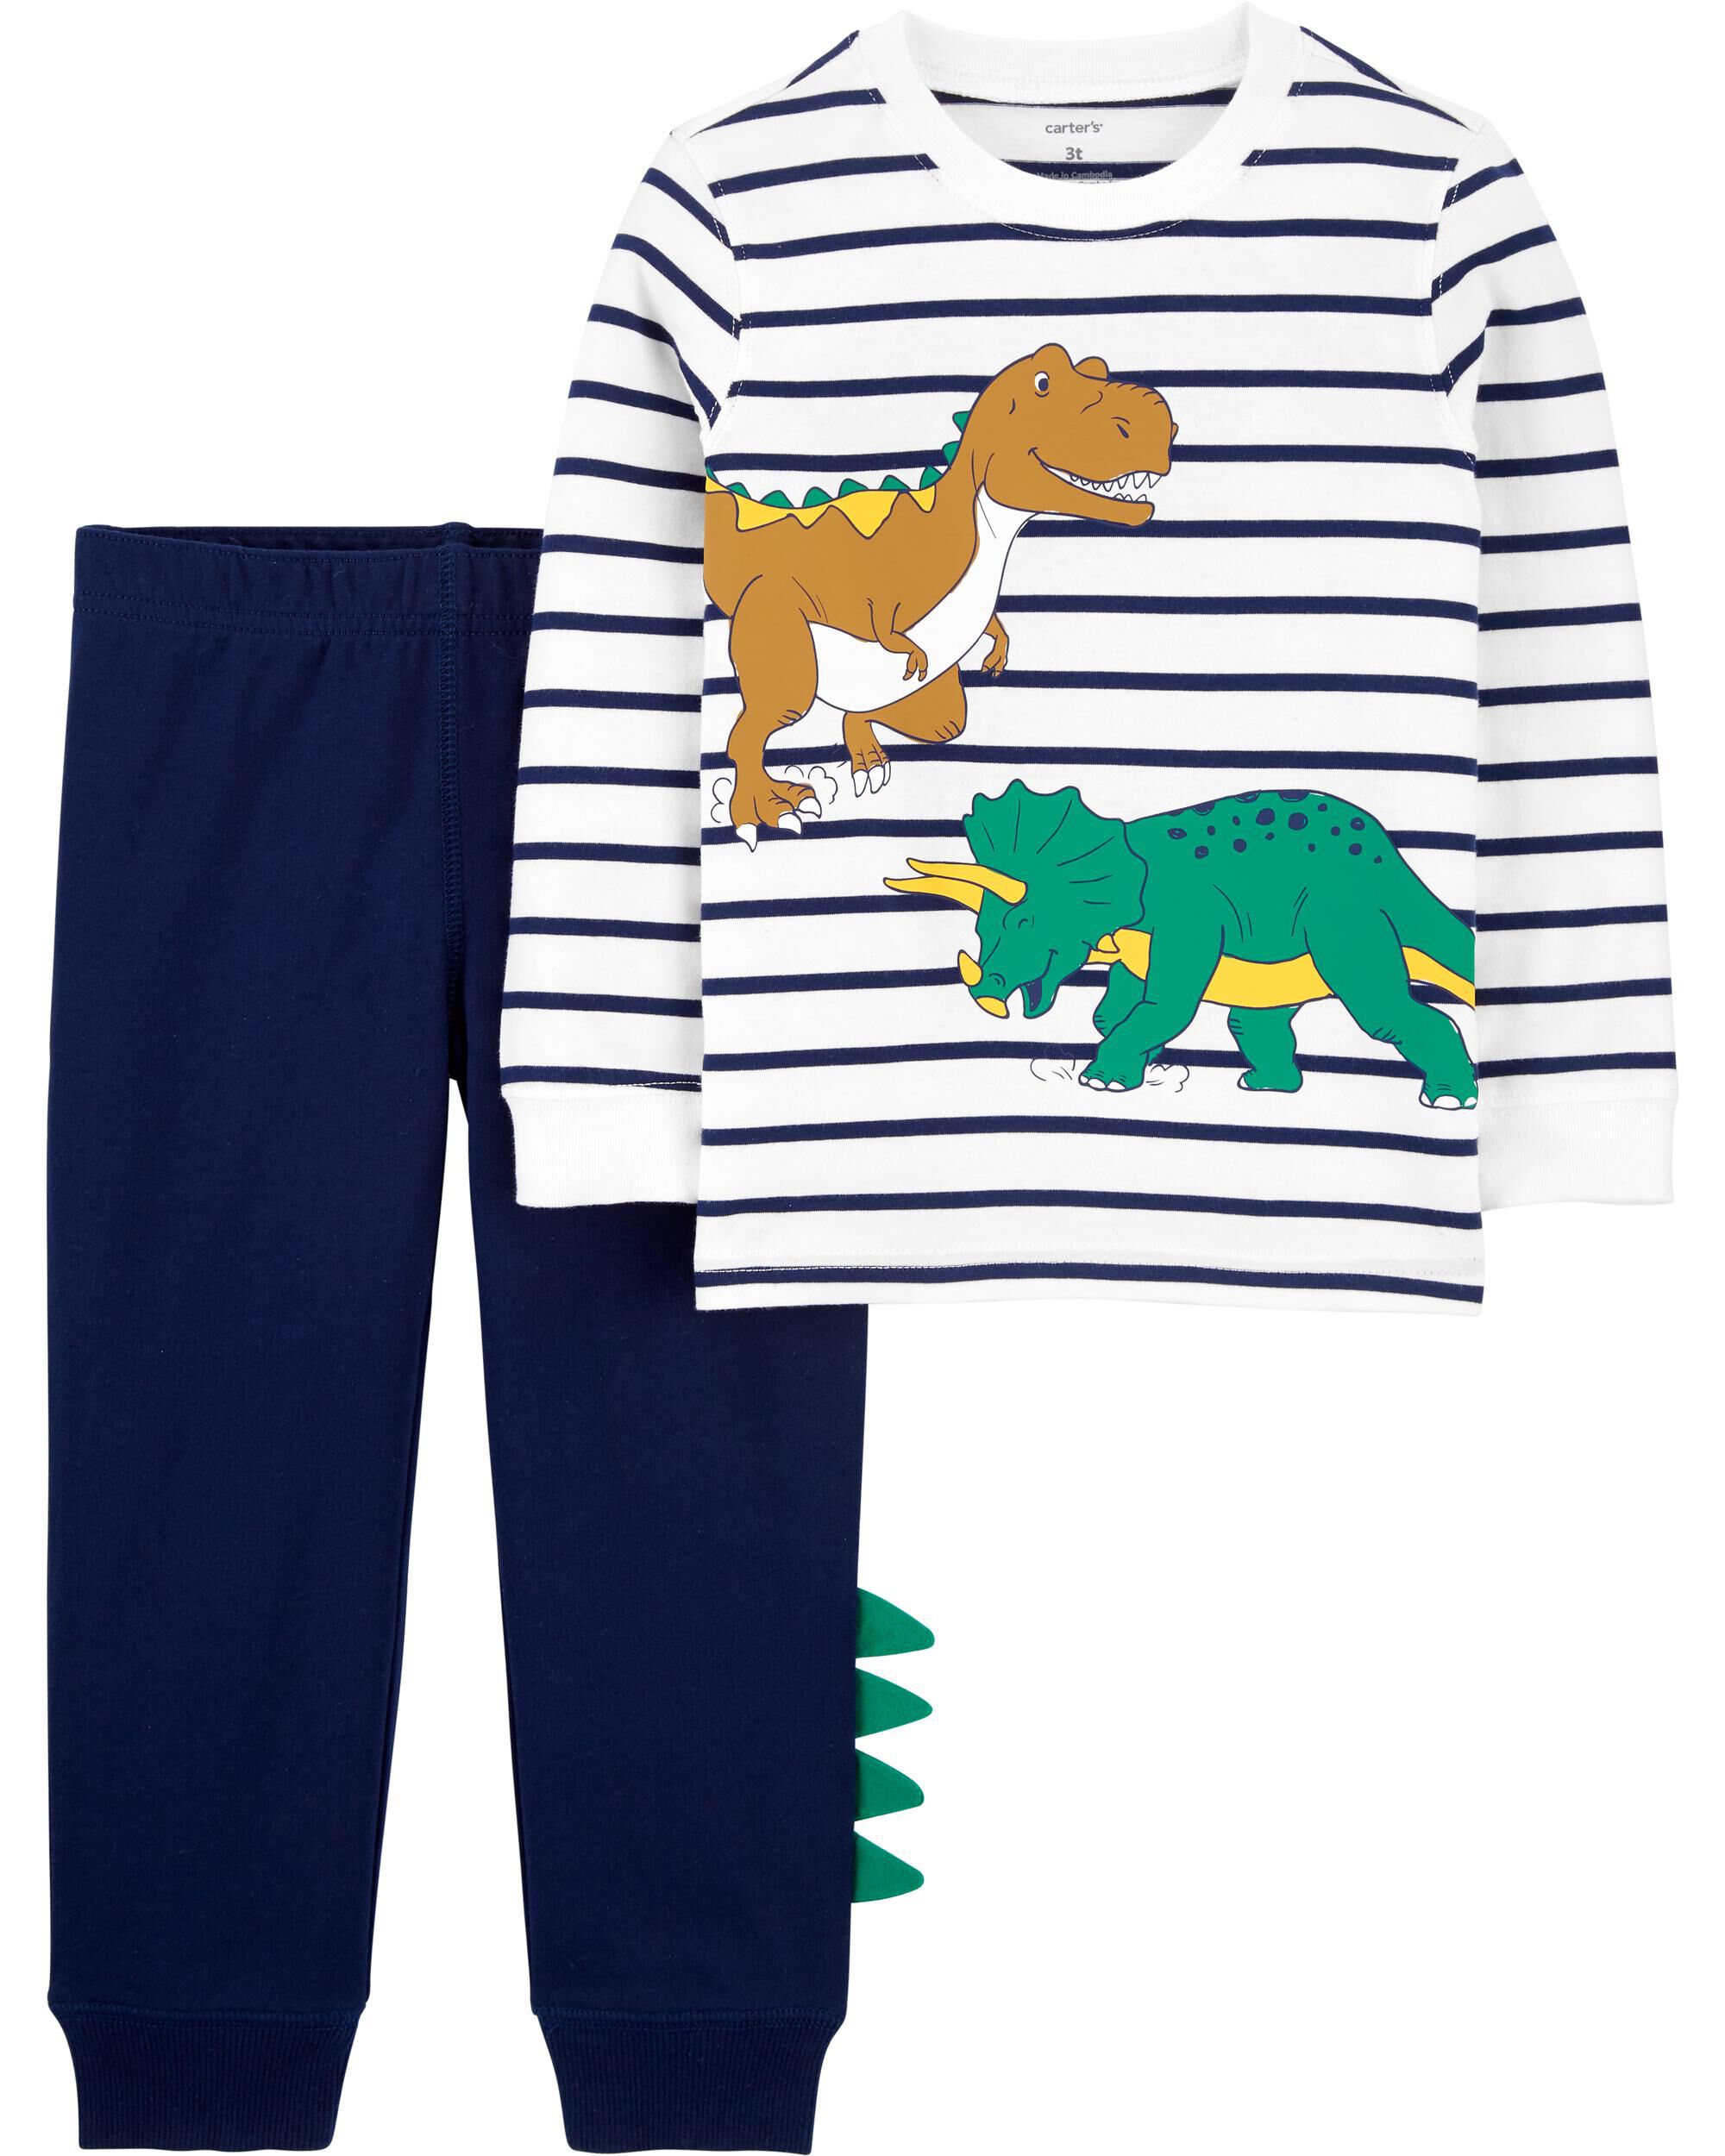 Carter's play wear outfit boy long sleeve pants navy striped NEW everyday set 